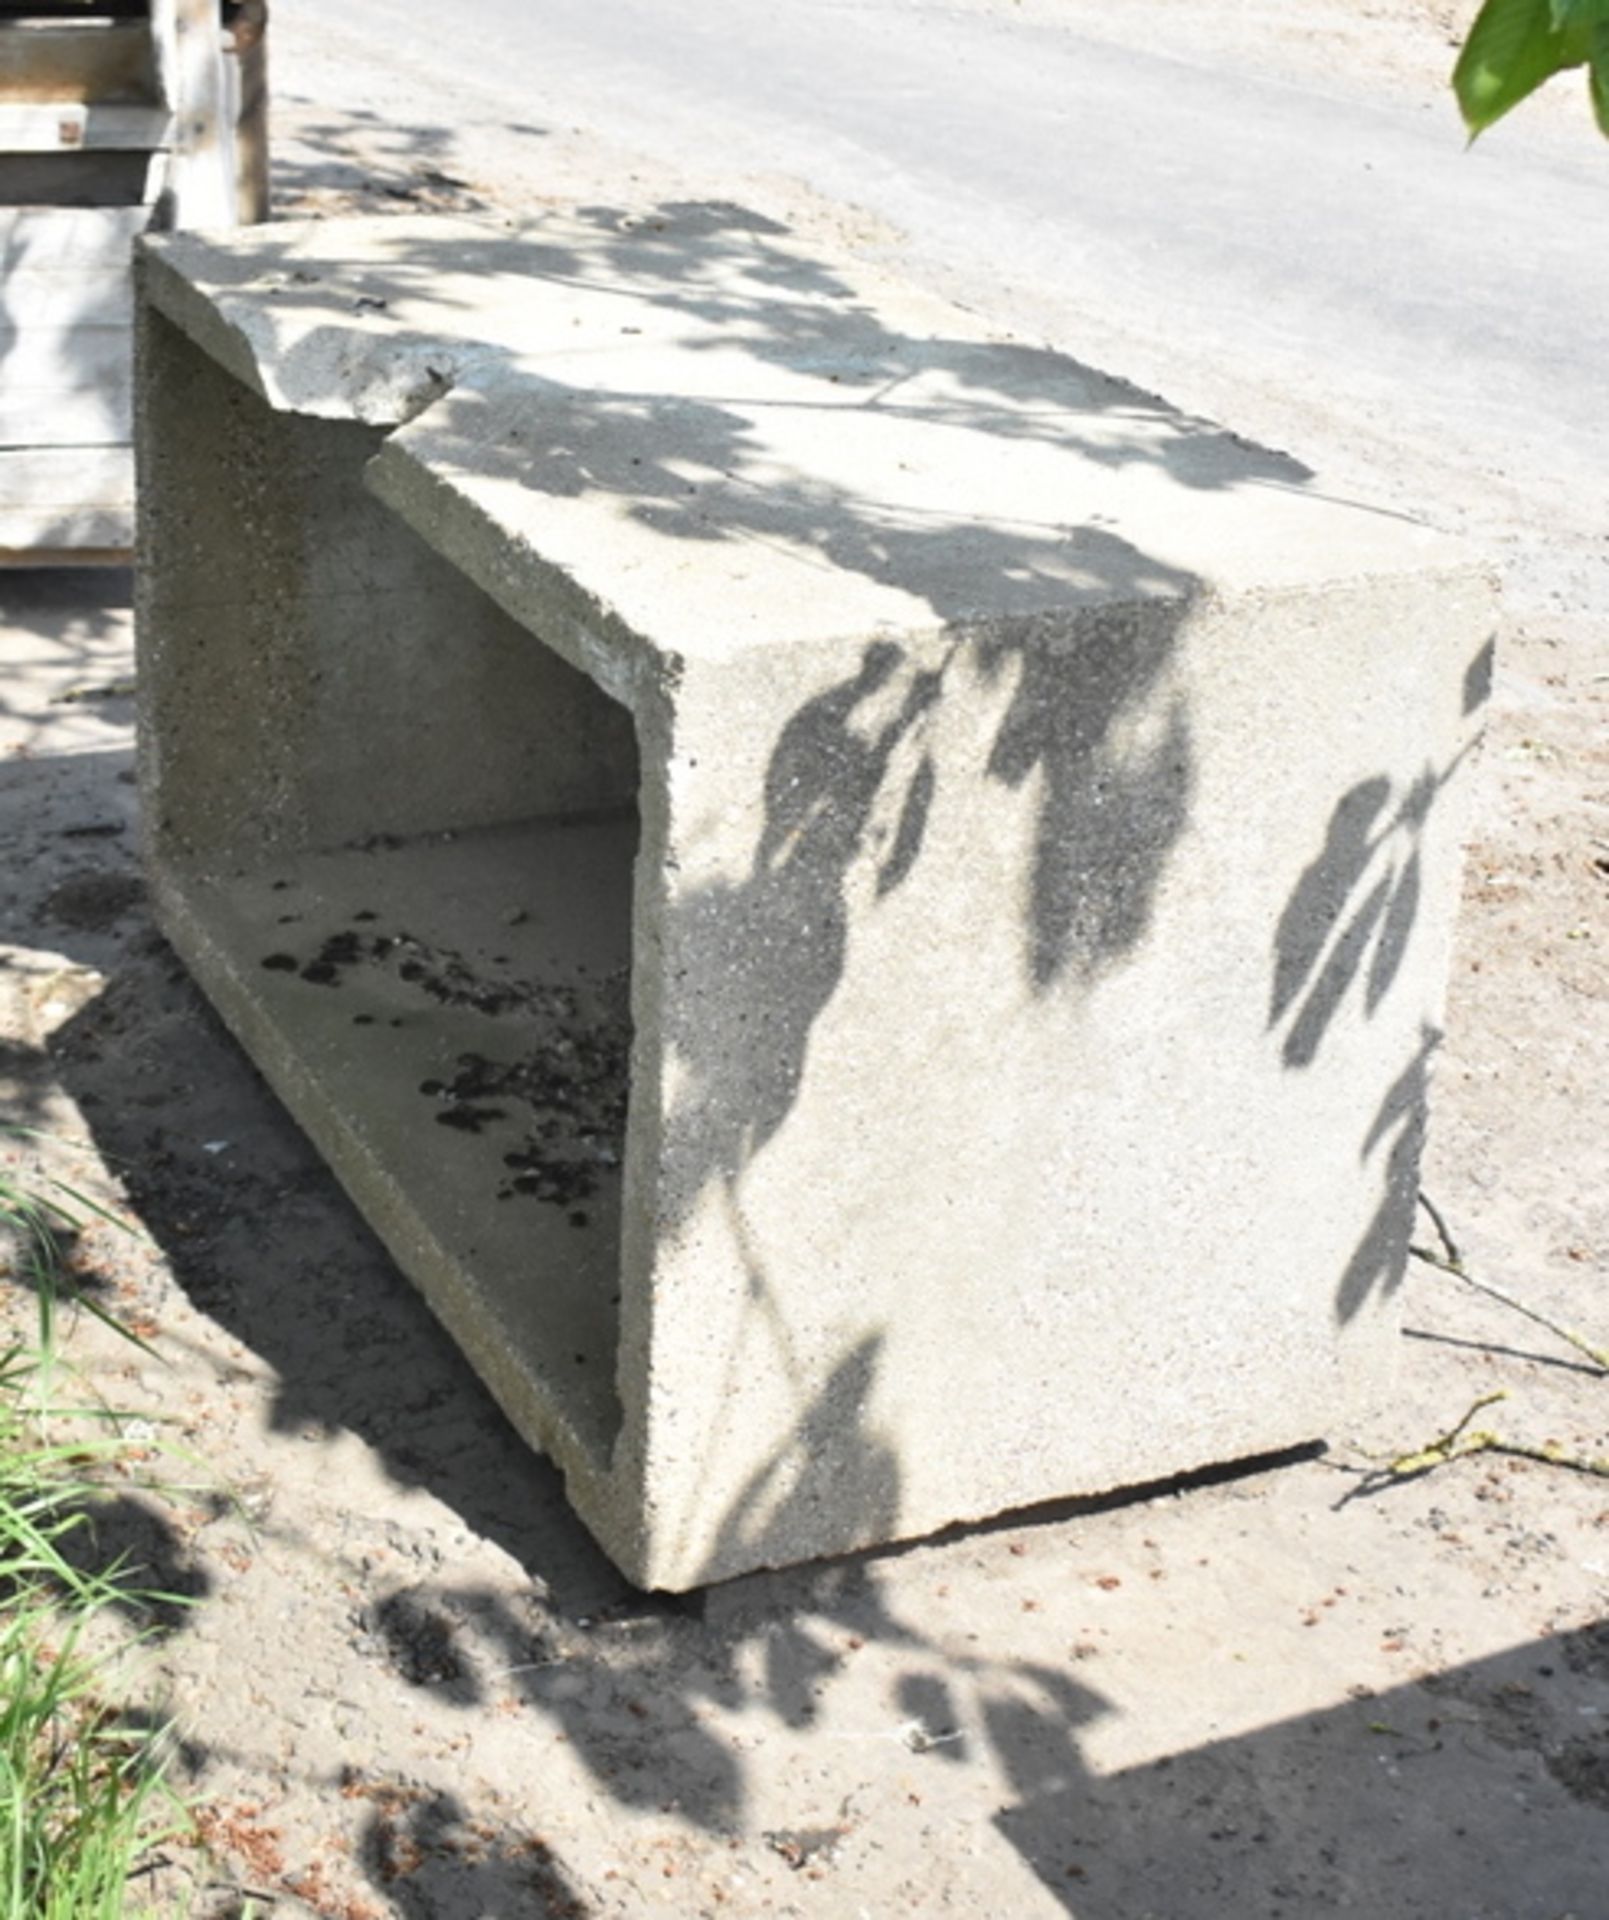 CONCRETE WATER TROUGH 54" LONG X 30" WIDE X 27" DEEP, FRACTURES - Image 3 of 3